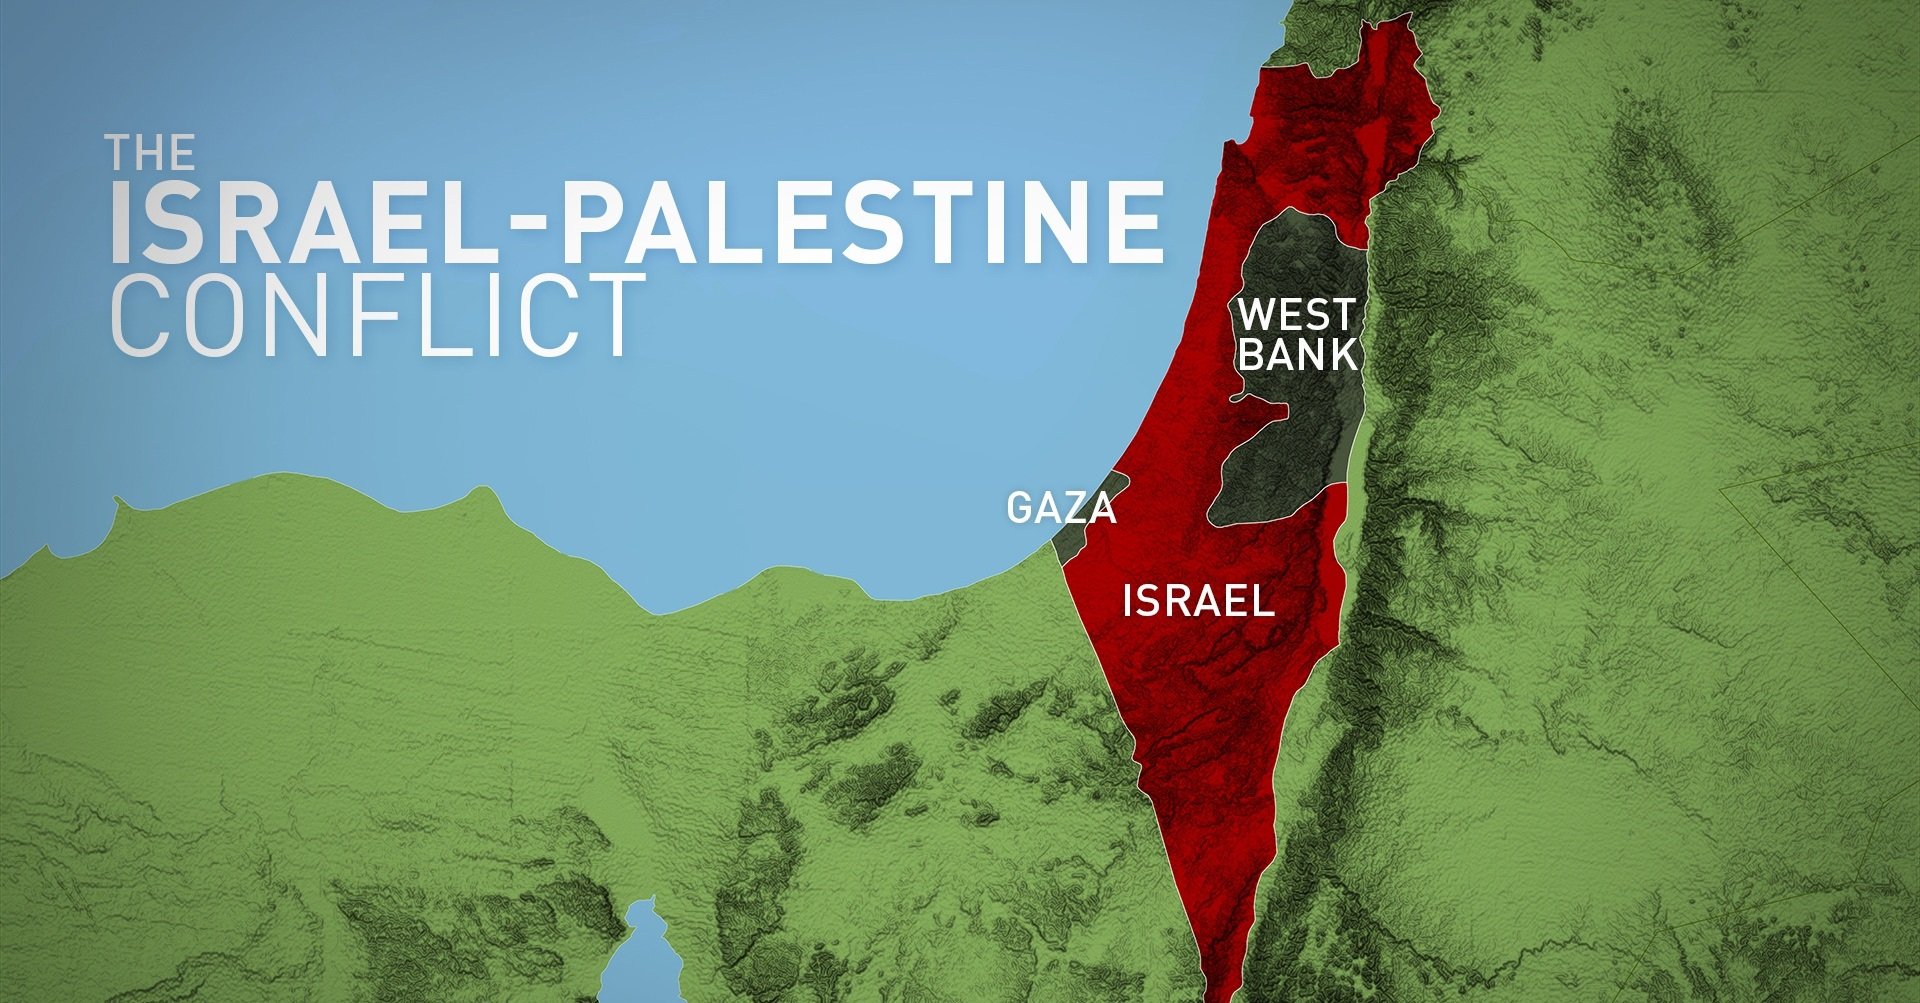 Causes Of The Israeli-Palestinian Conflict